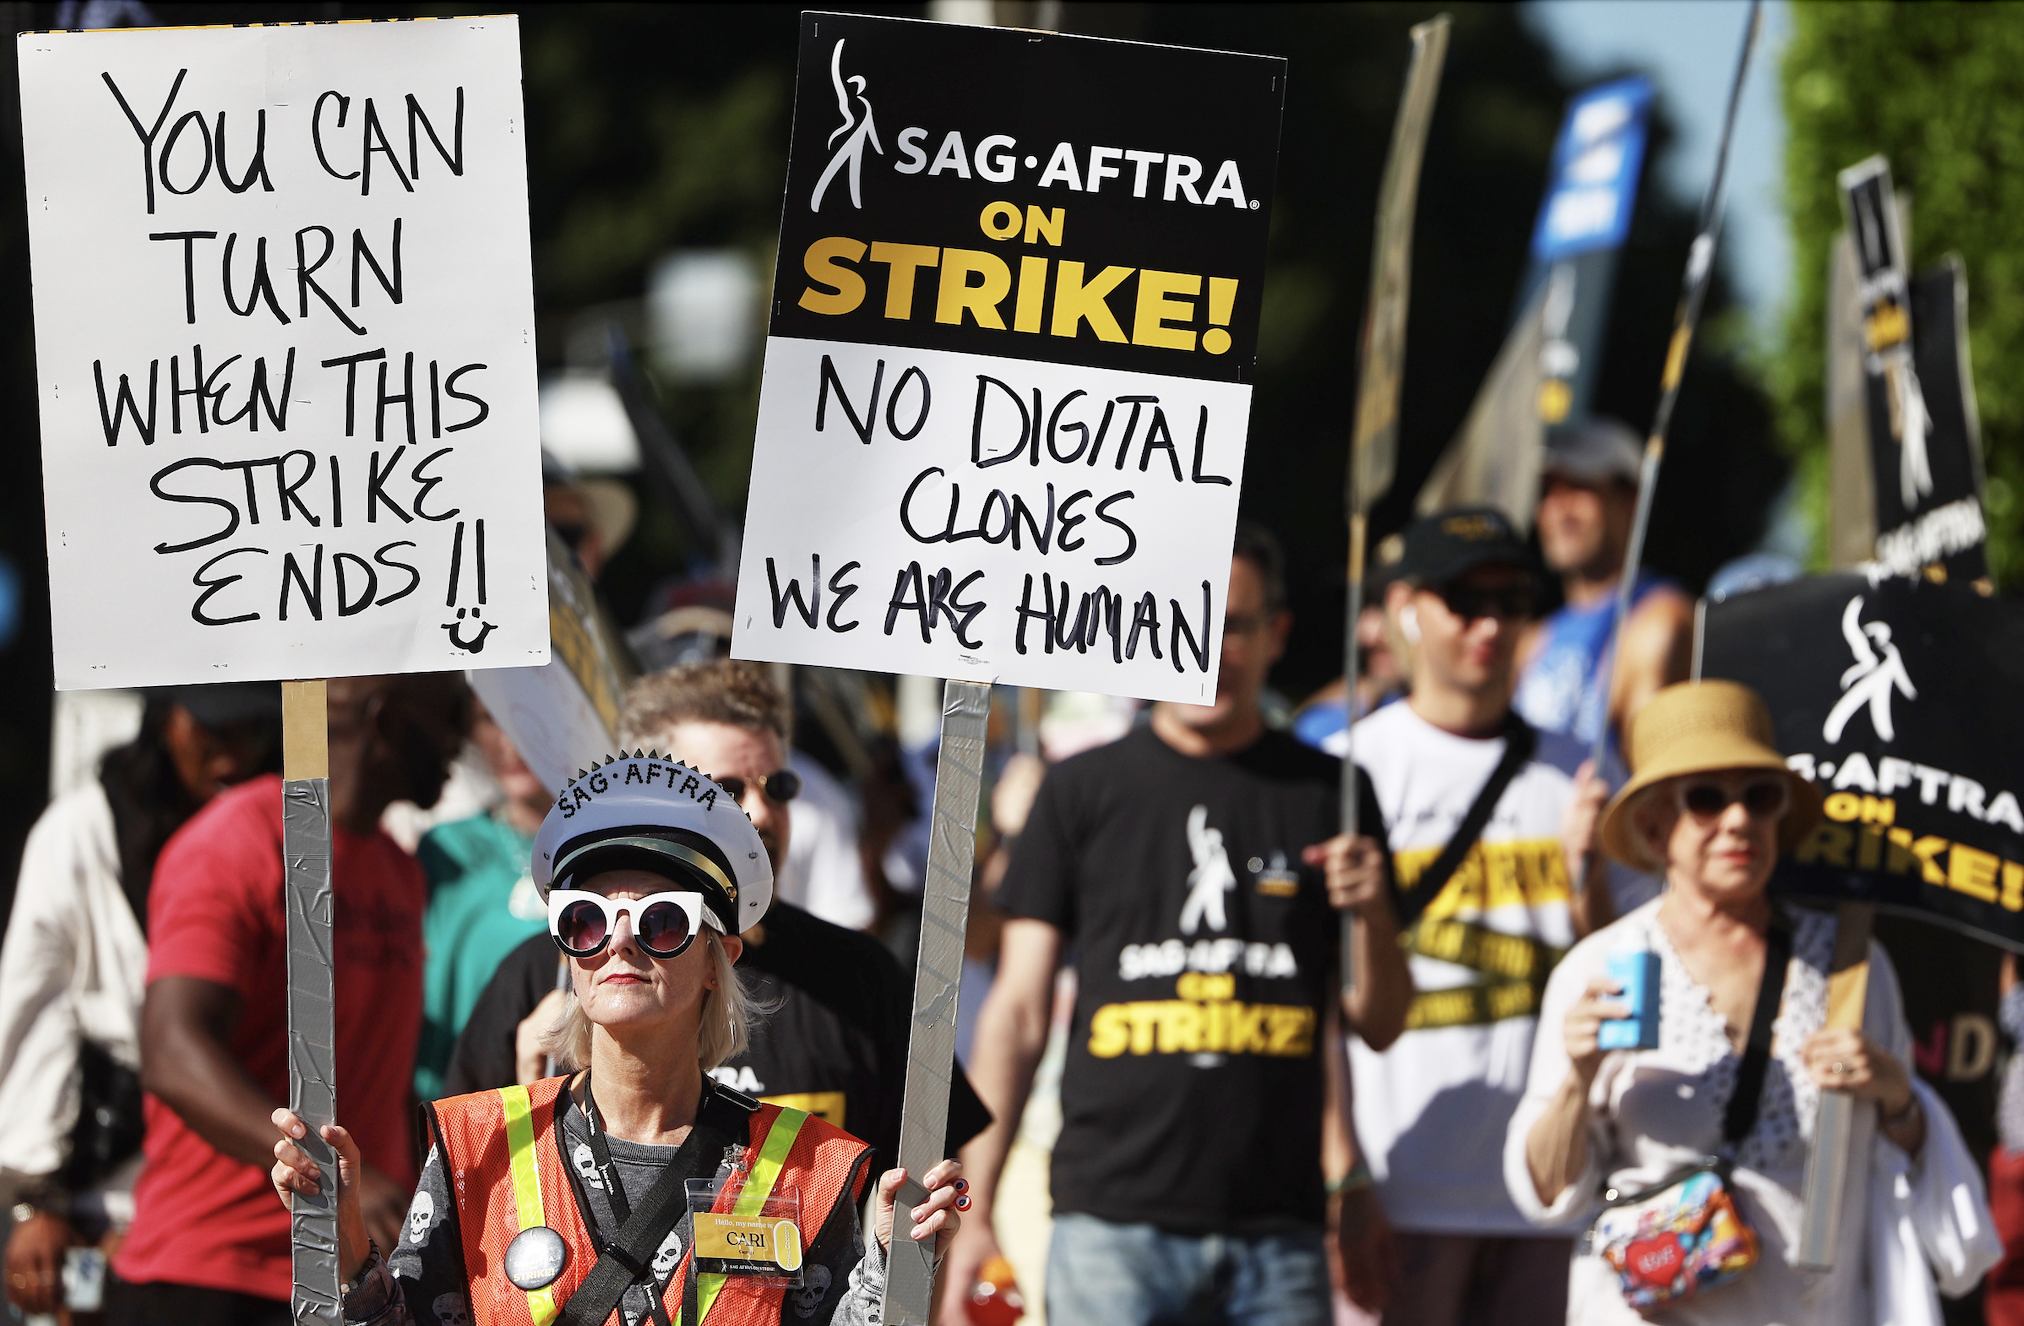 SAG AFTRA strikers with sign that says &quot;no digital clones, we are human&quot;